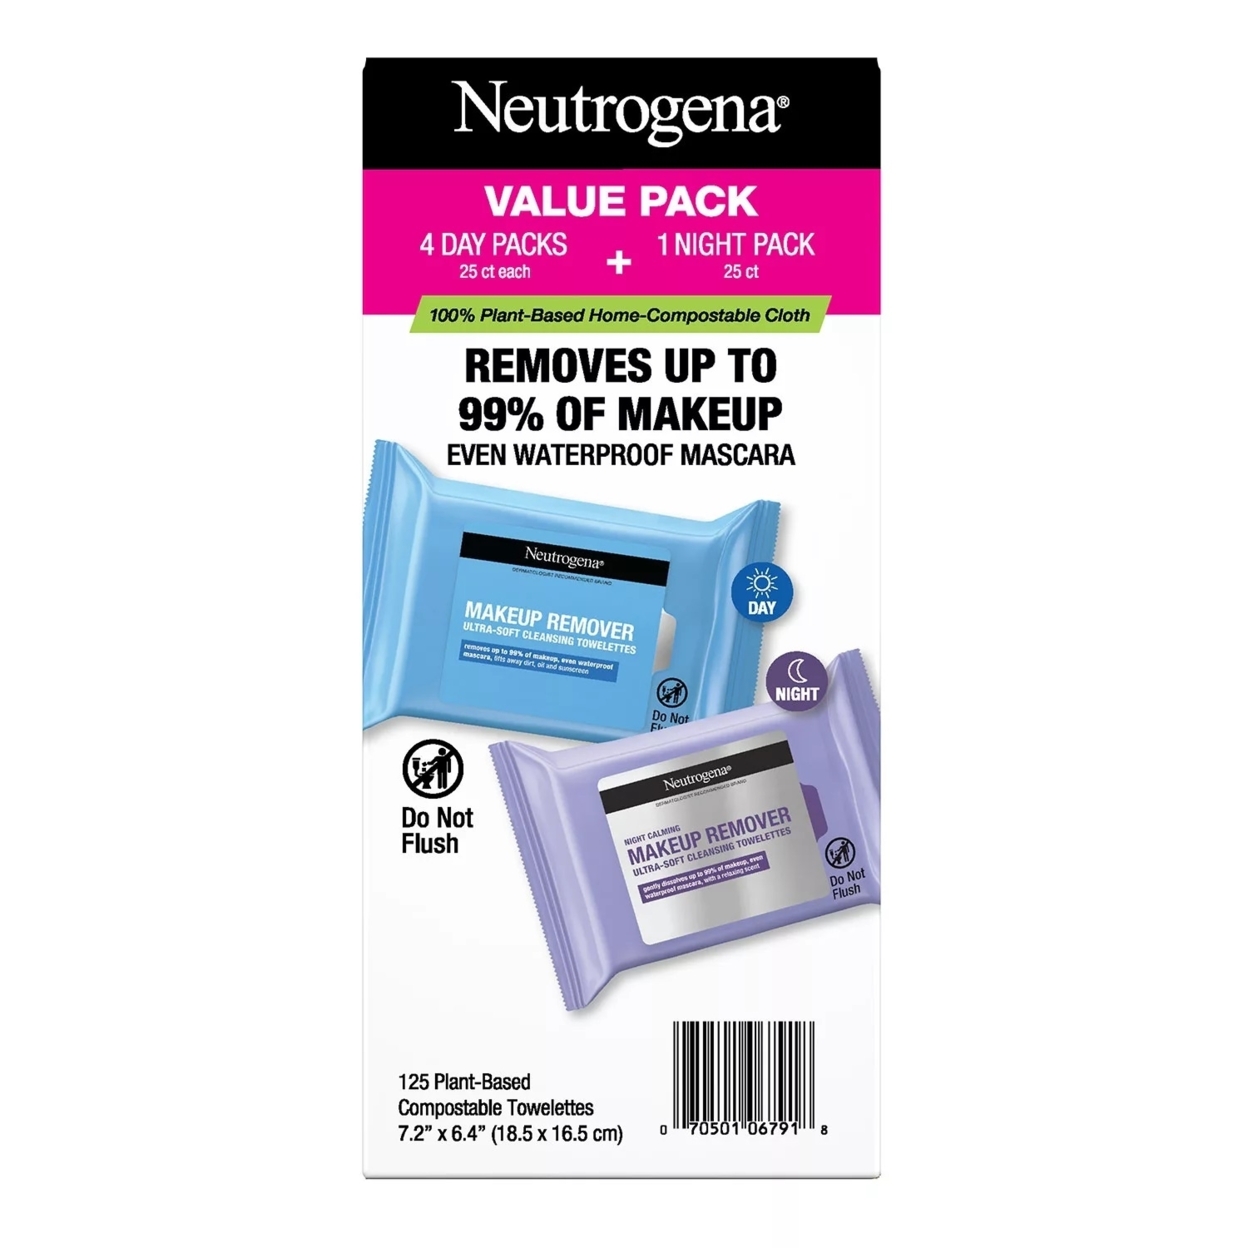 Neutrogena Makeup Remover & Night Calming Cleansing Towelettes (125 Count)